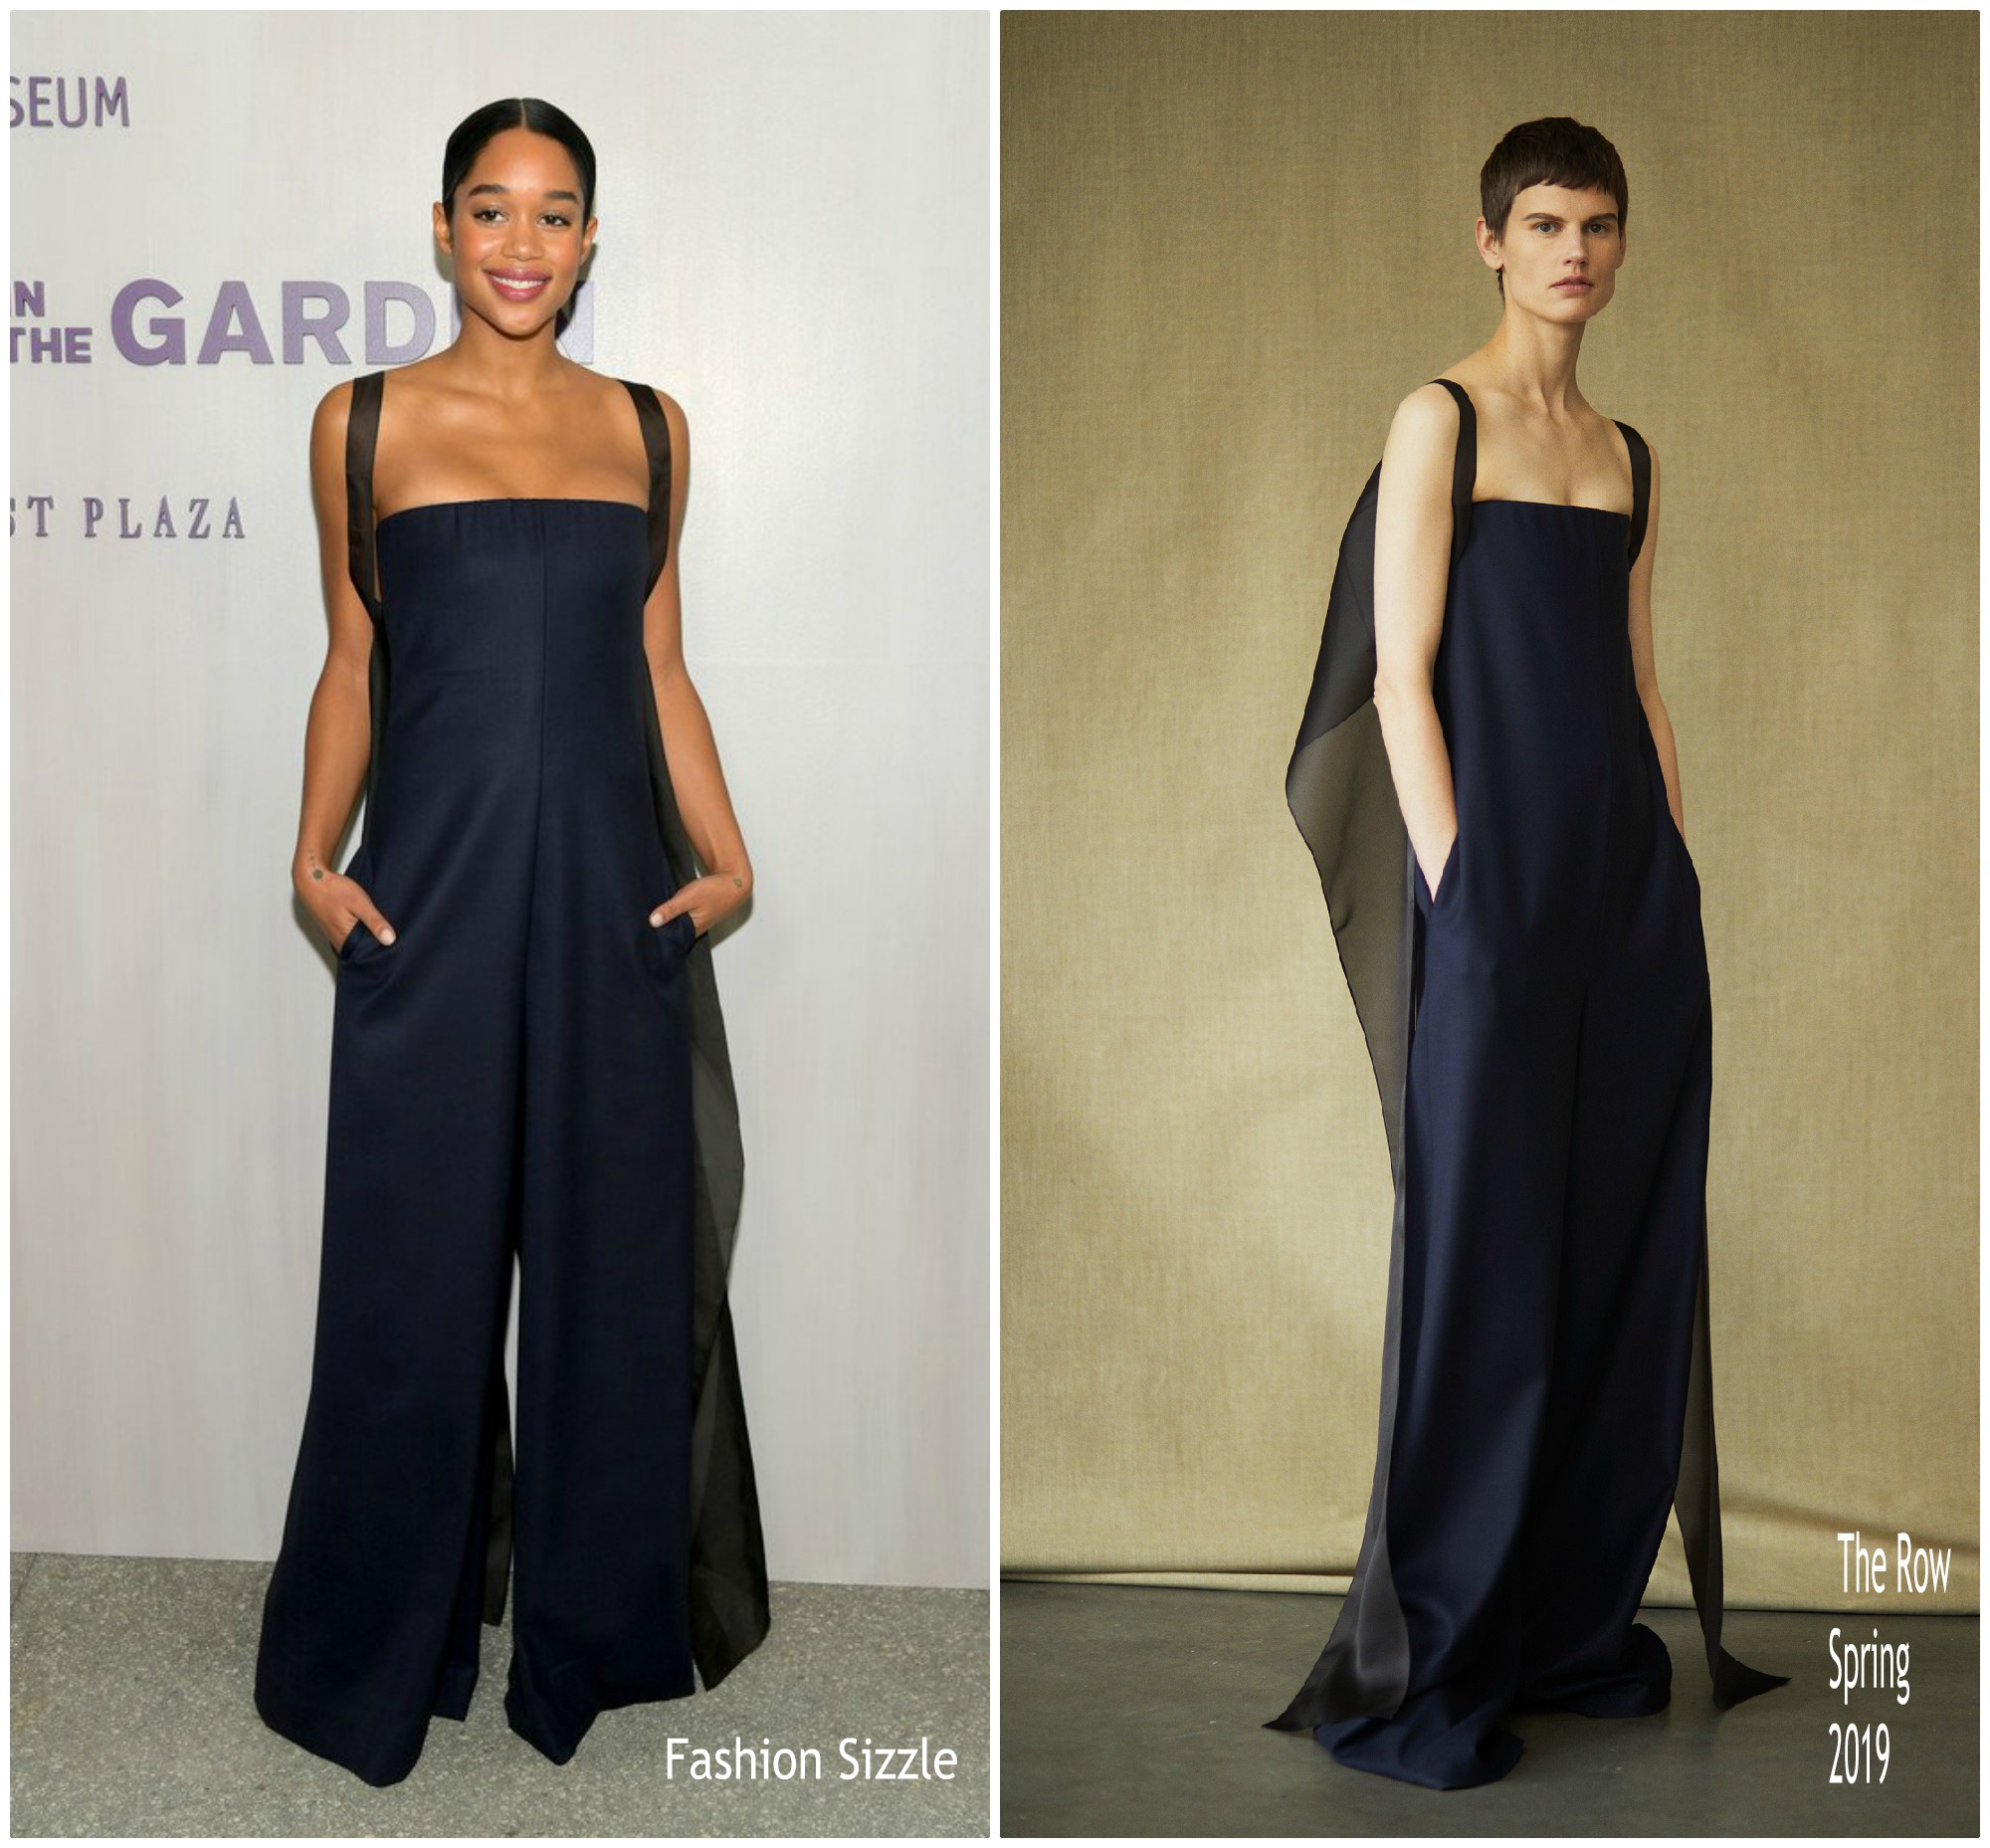 laura-harrier-in-the-row-hammer-museum-16th-annual-gala-in-the-garden